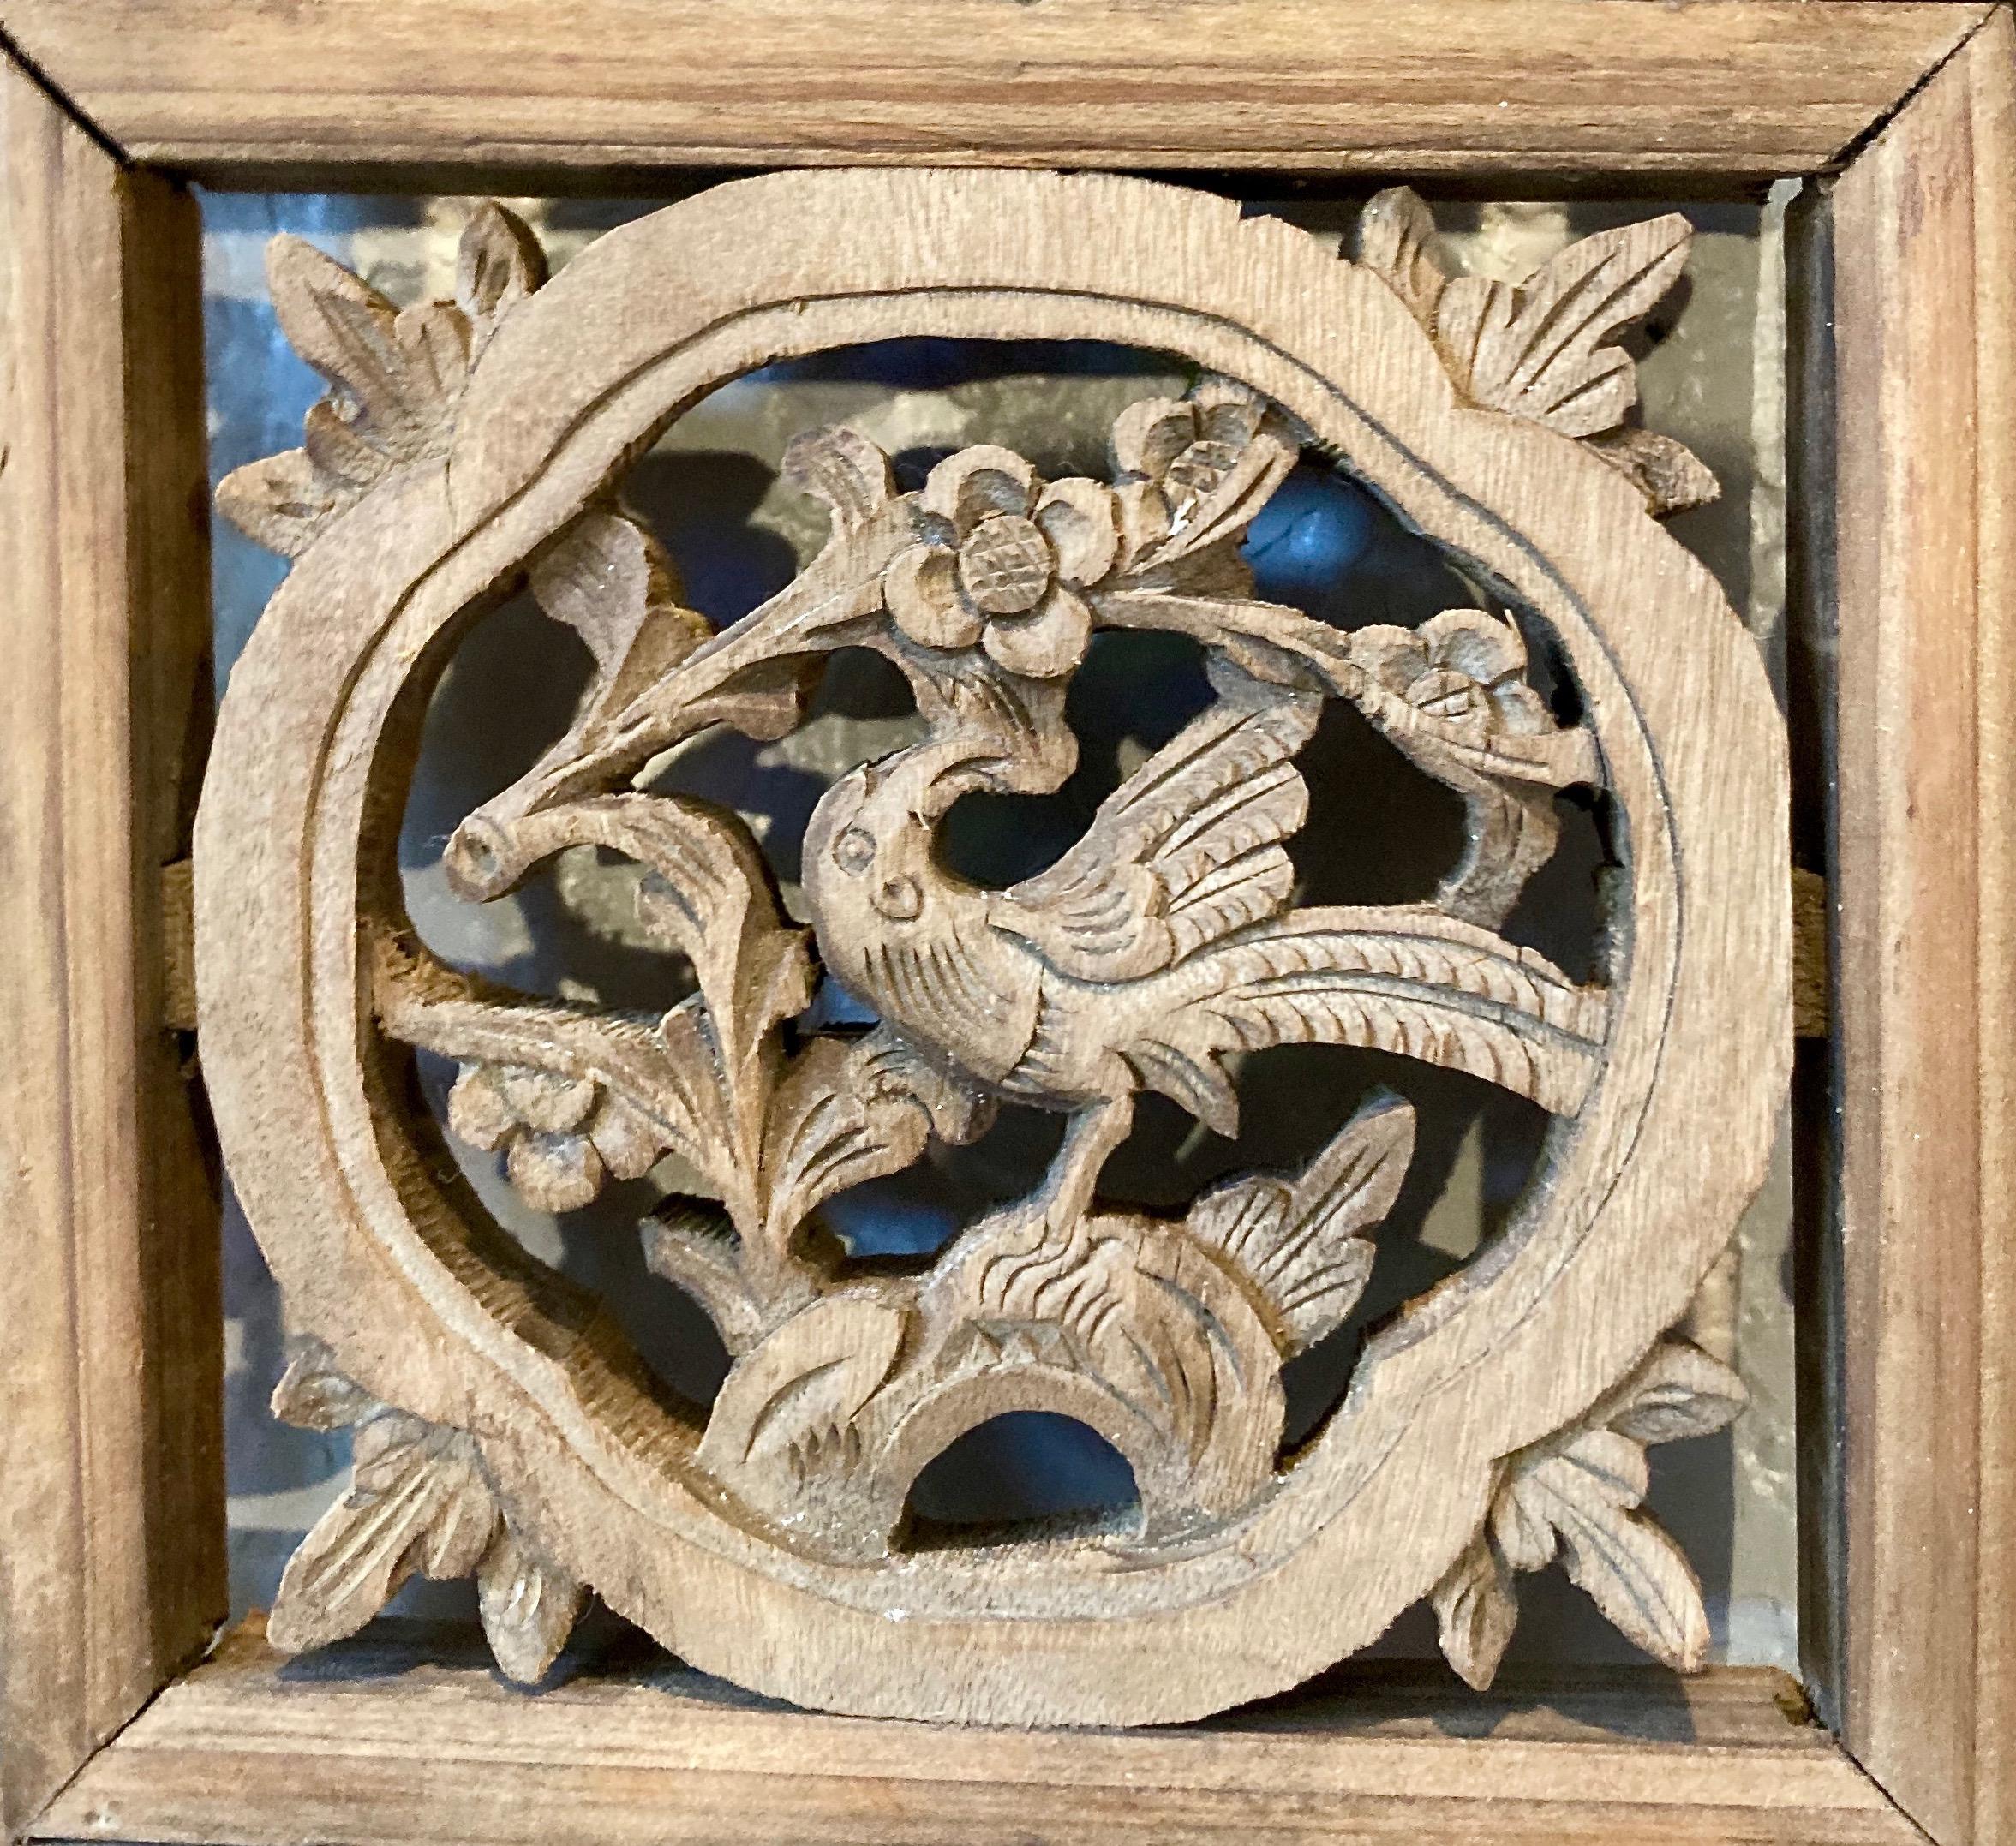 Thick framed panel with three panes, openwork and relief carvings, and lattice work. Circular shaped center carving with bird/floral motif. Lower pane includes animal and bird motif.